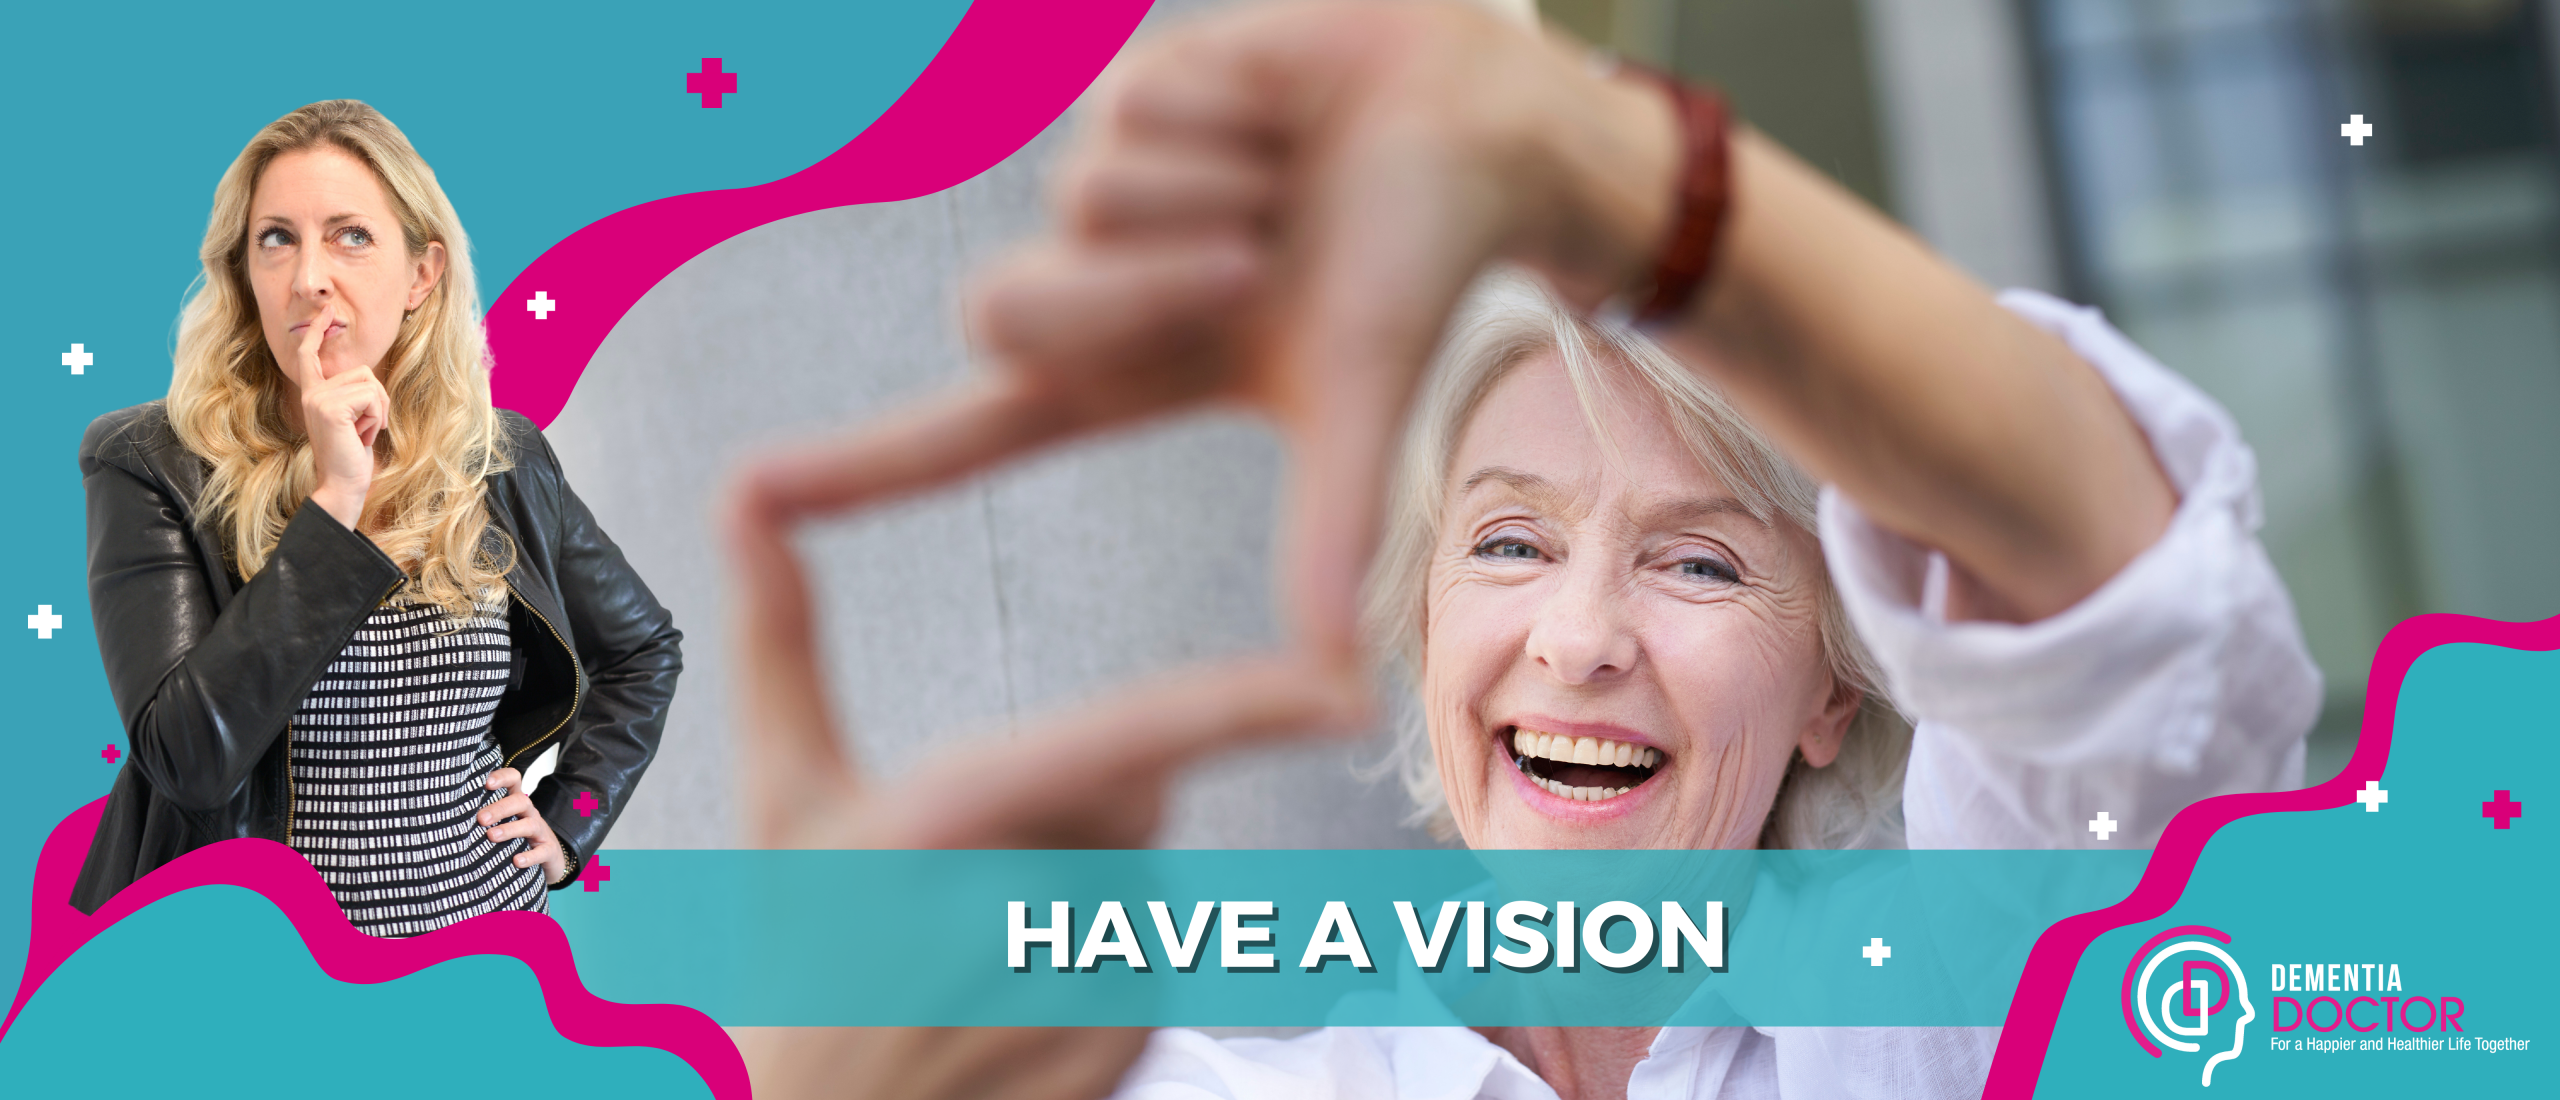 Have a vision!